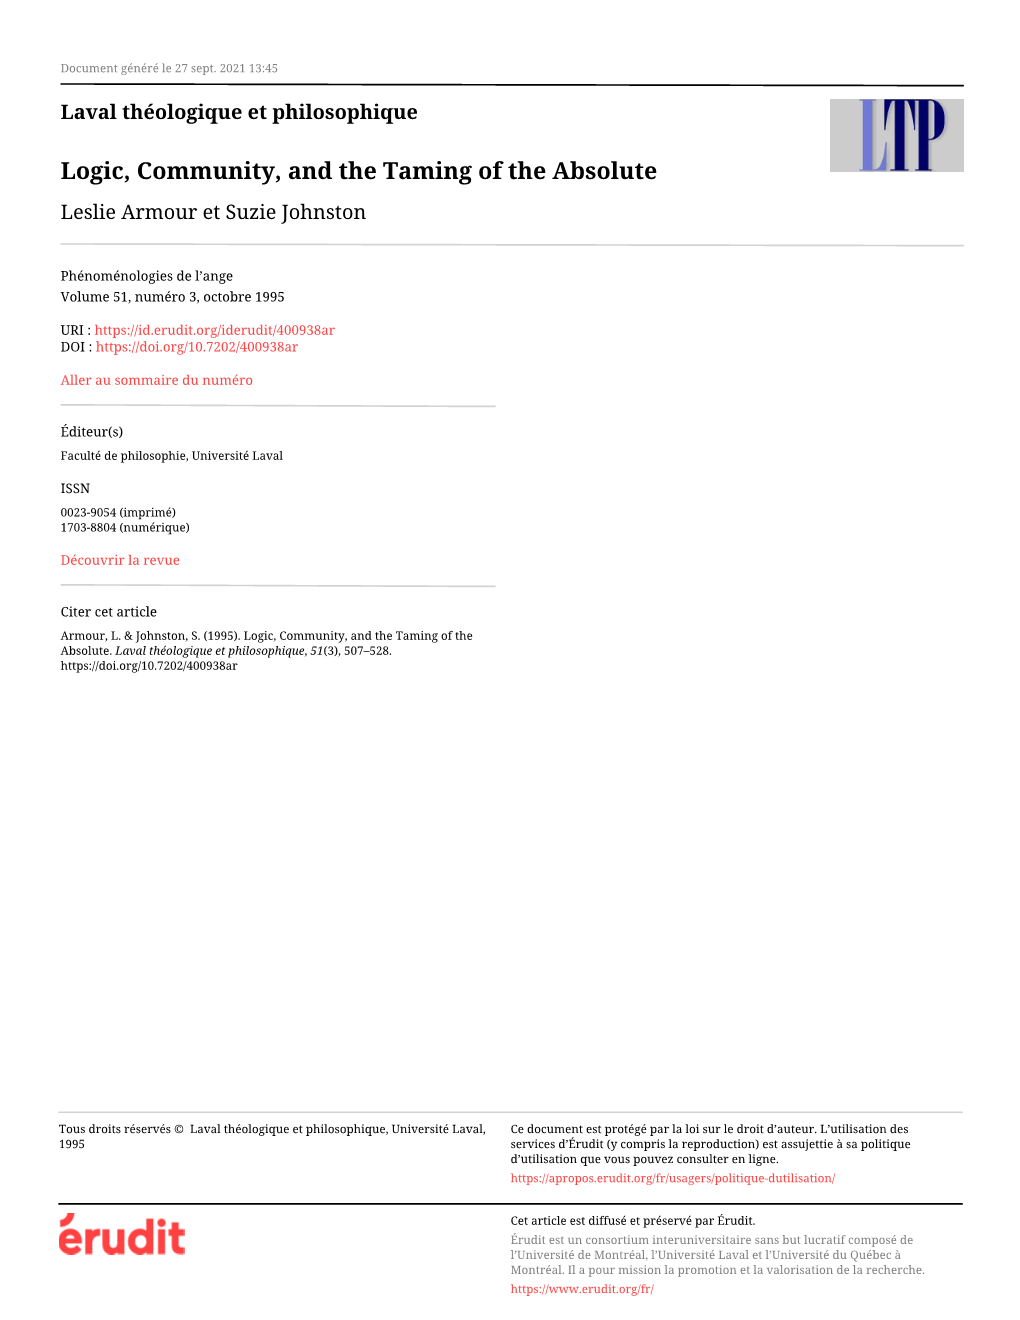 Logic, Community, and the Taming of the Absolute Leslie Armour Et Suzie Johnston